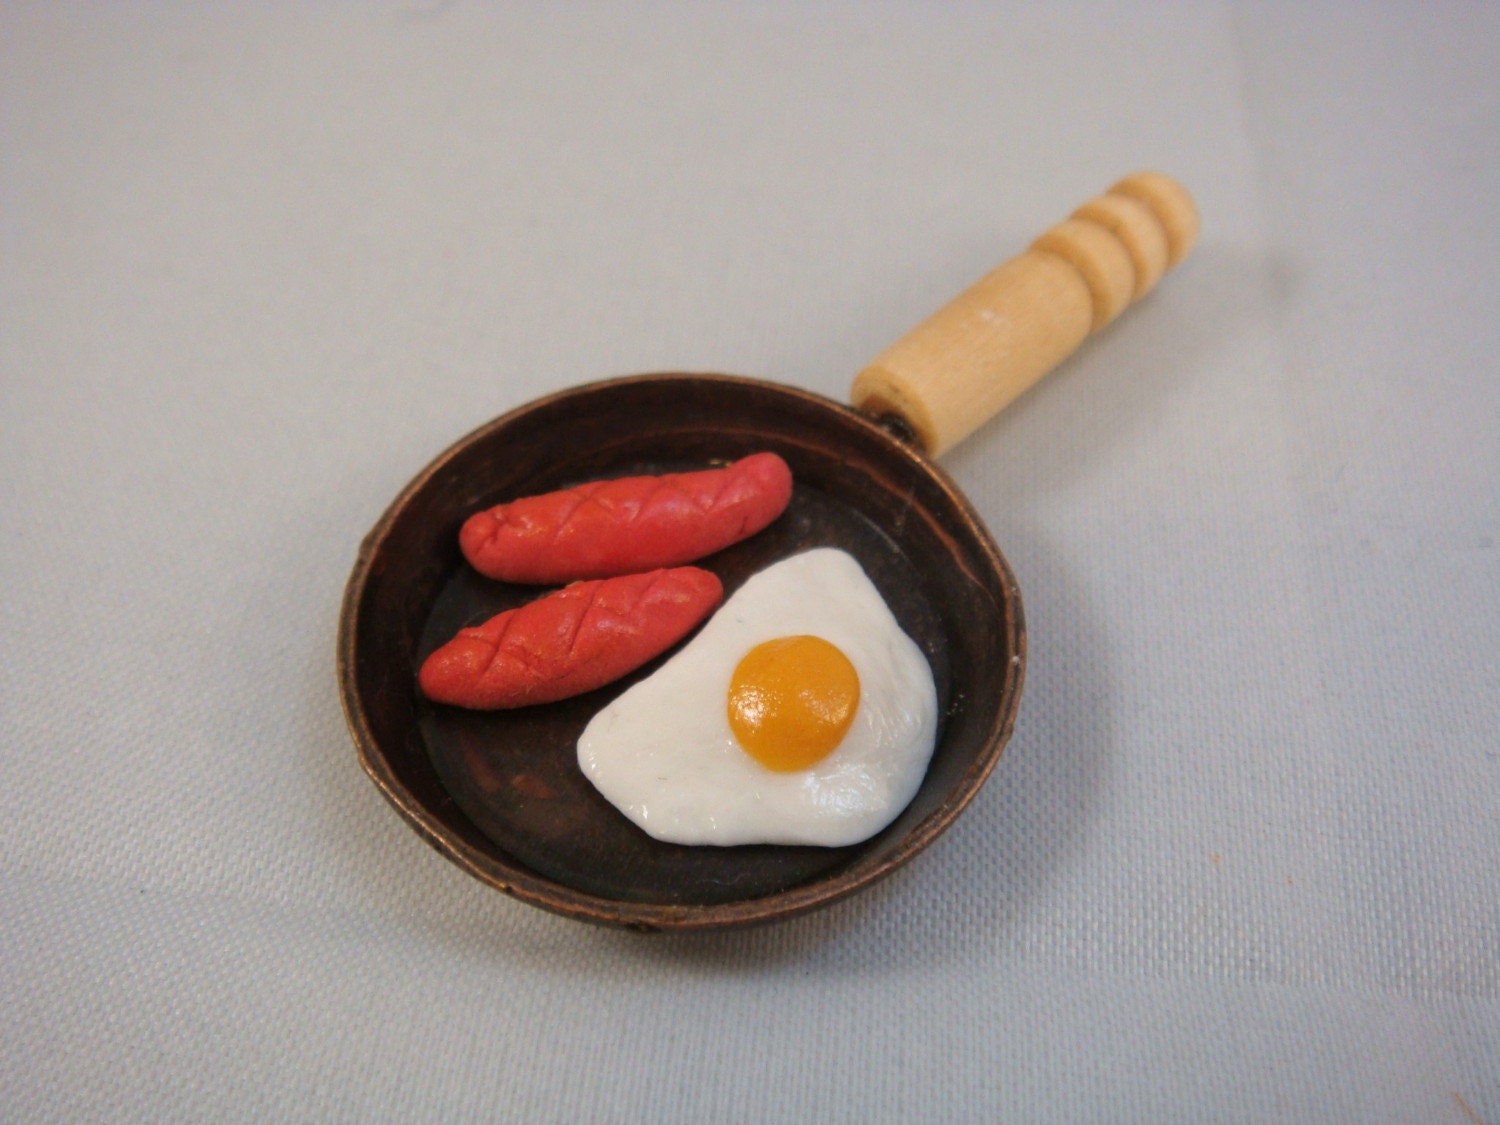 Dollhouse Miniature - Breakfast Fried Egg and Sausages in Pan